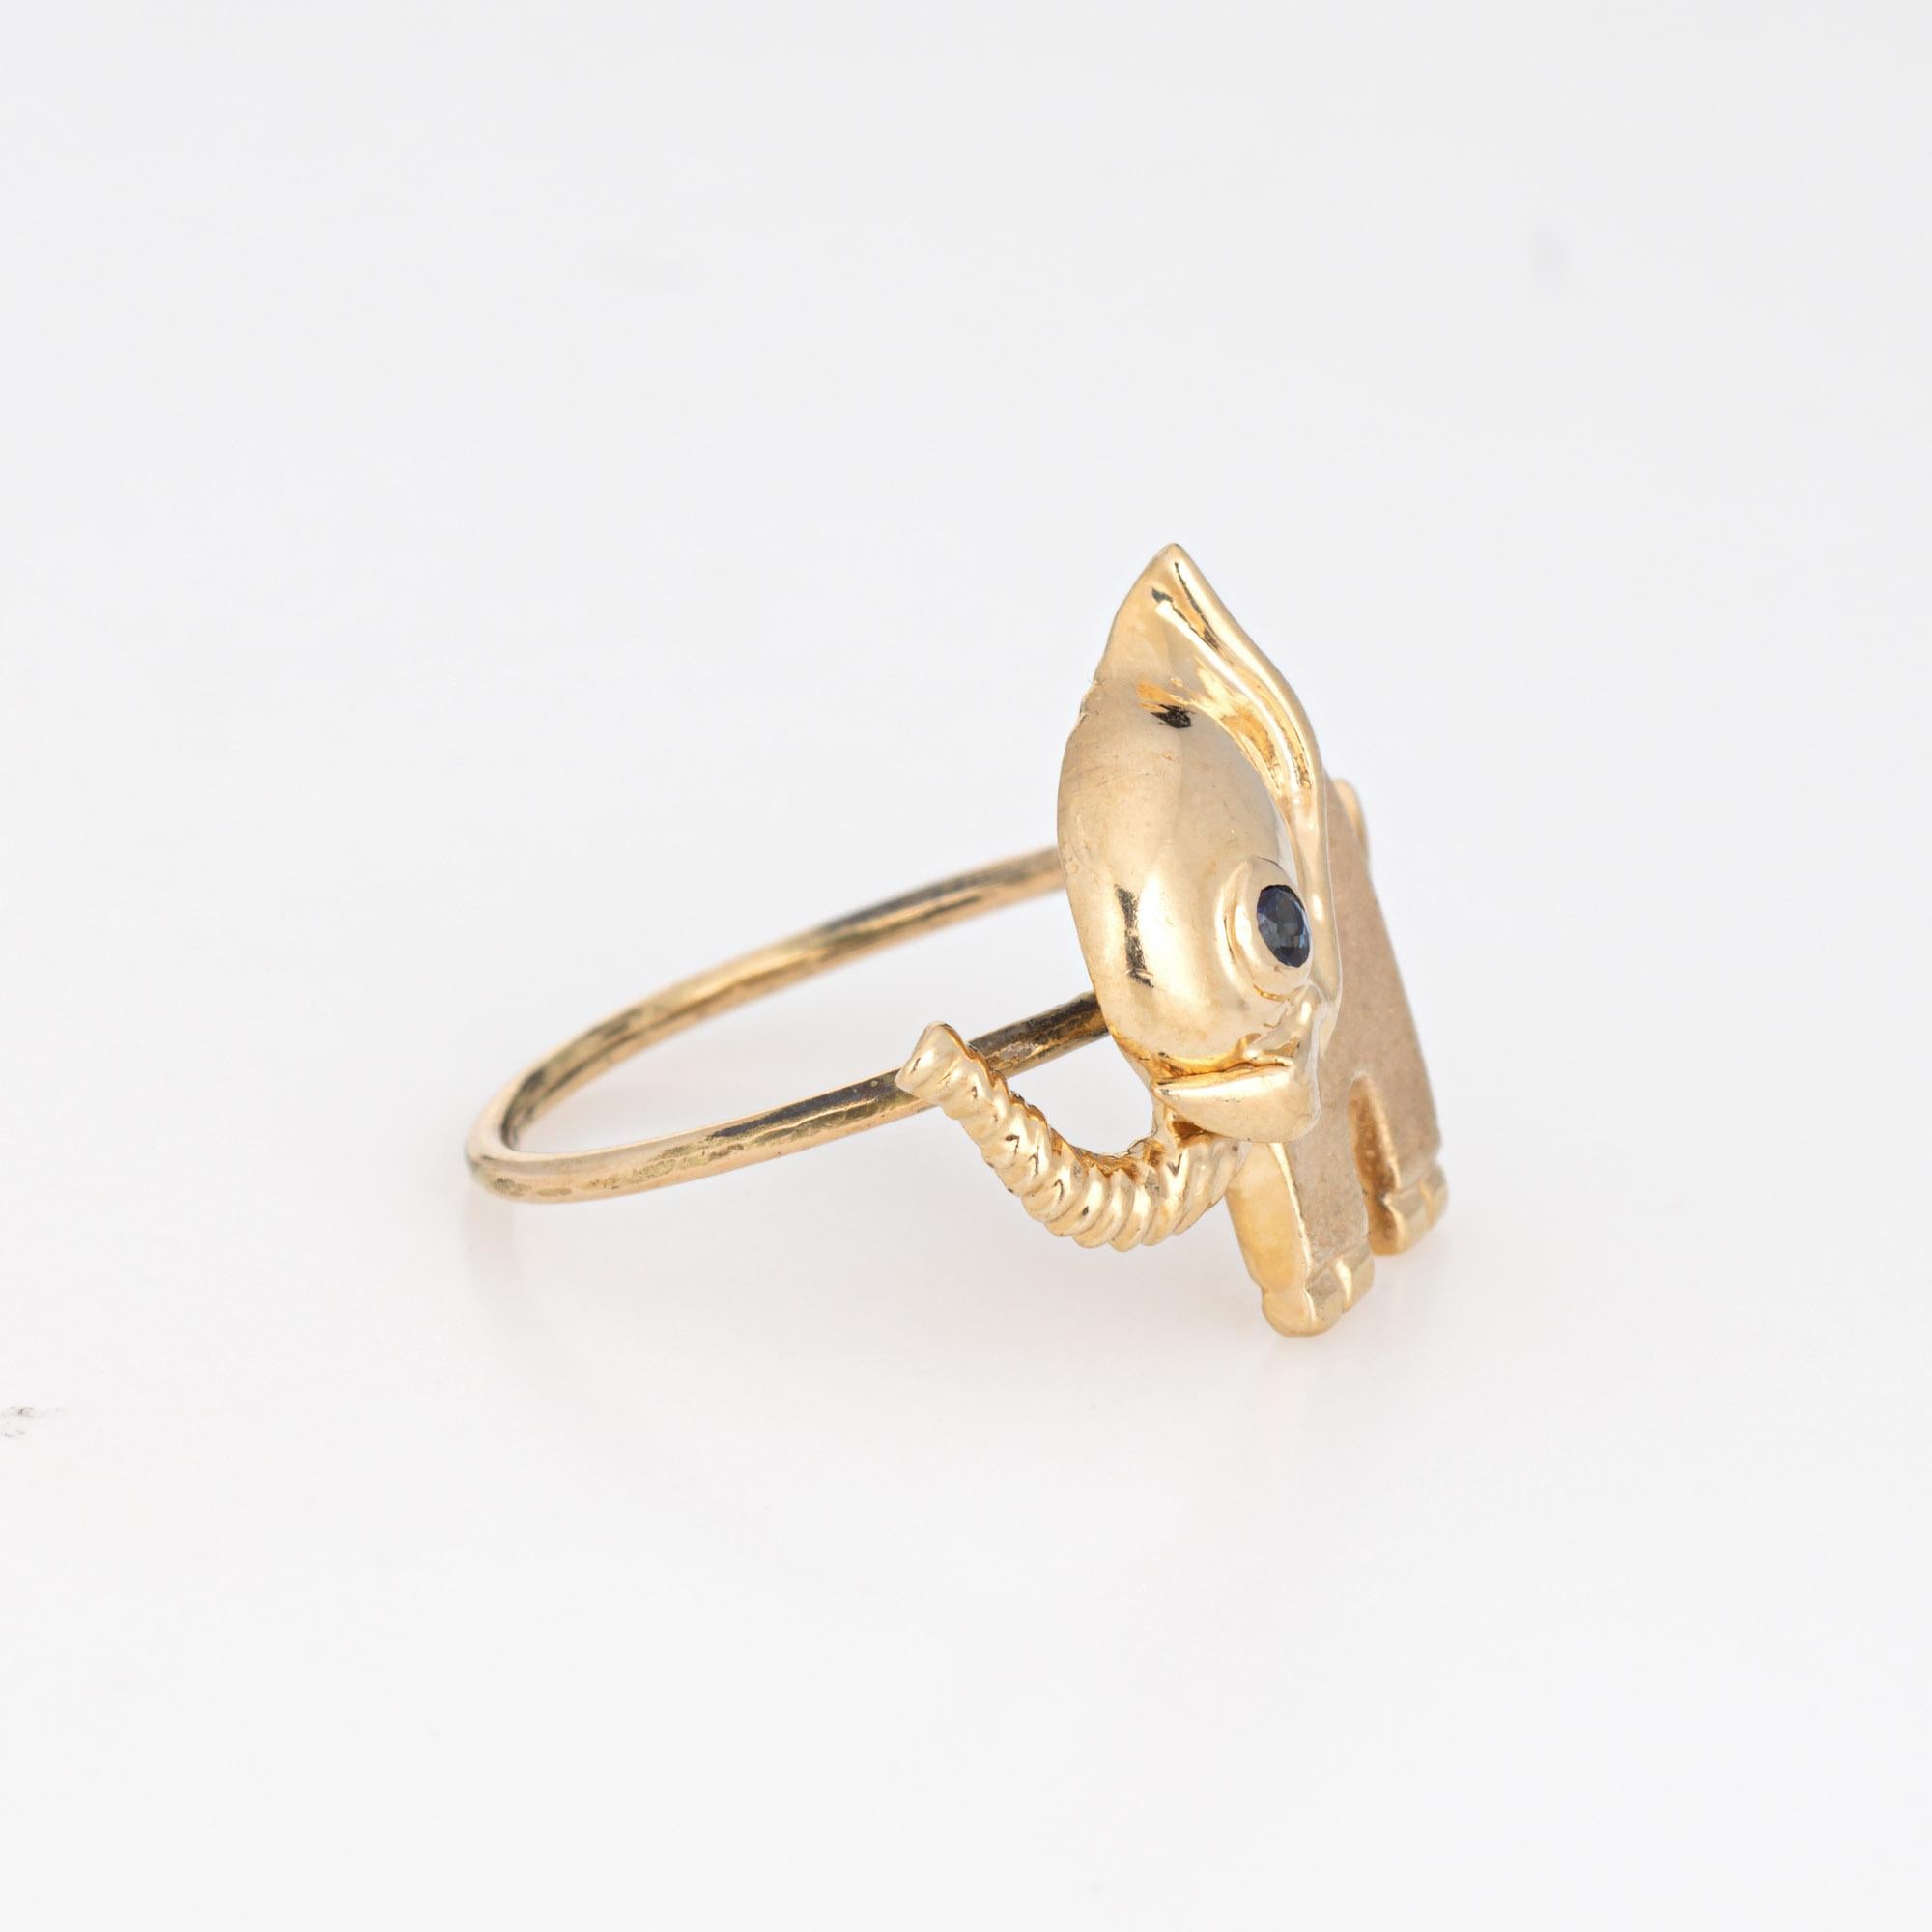 Modern Vintage Elephant Conversion Ring 14k Yellow Gold Sz 5.75 Fine Animal Jewelry For Sale